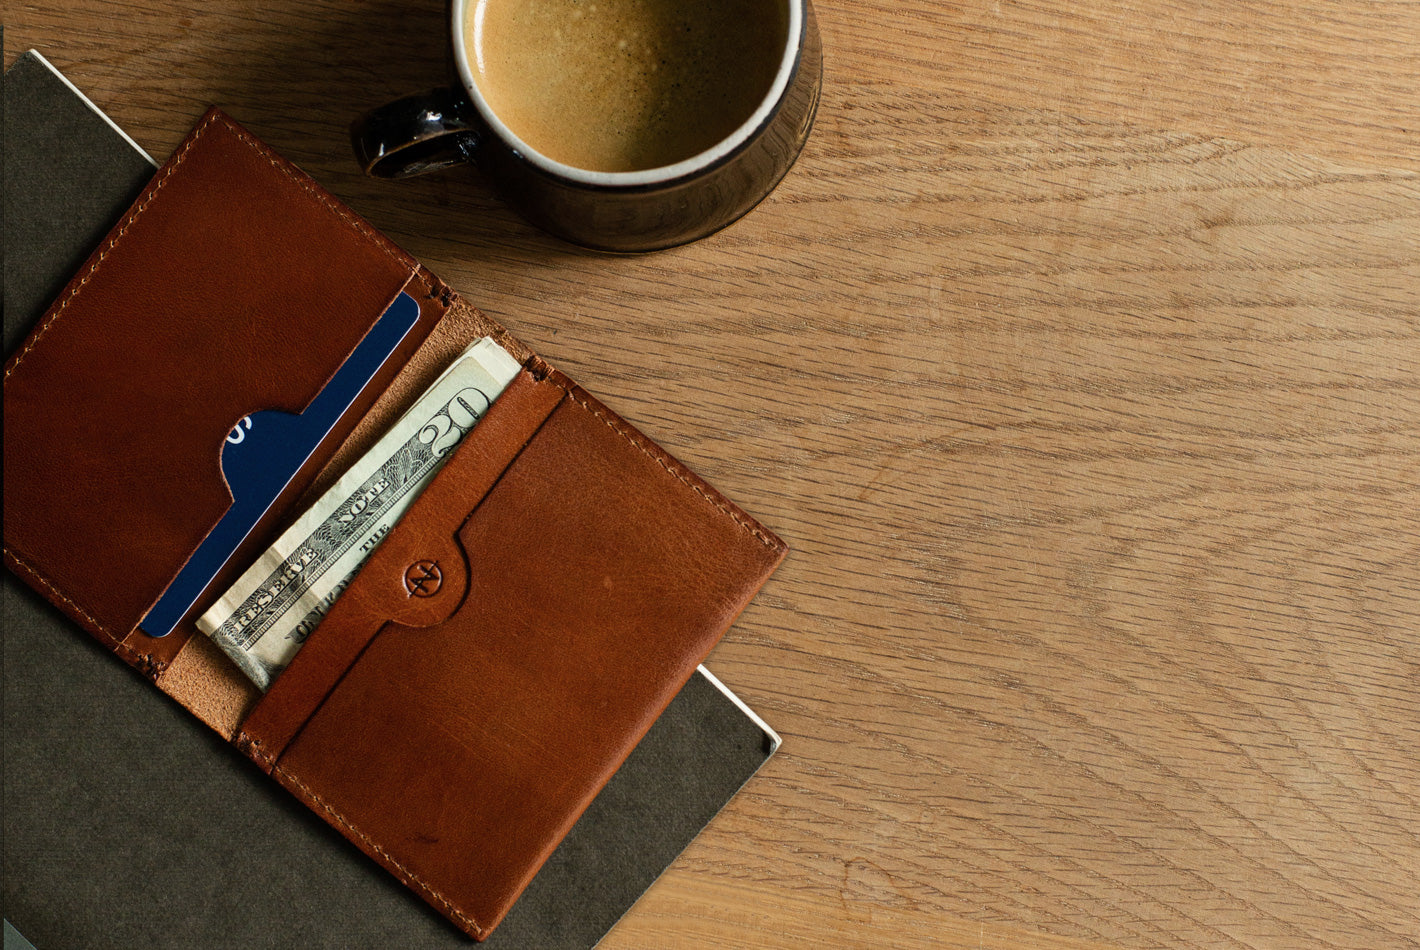 The Cognac Nimrodian Bi-Fold Card Case from VOID Watches, designed by David Ericsson.